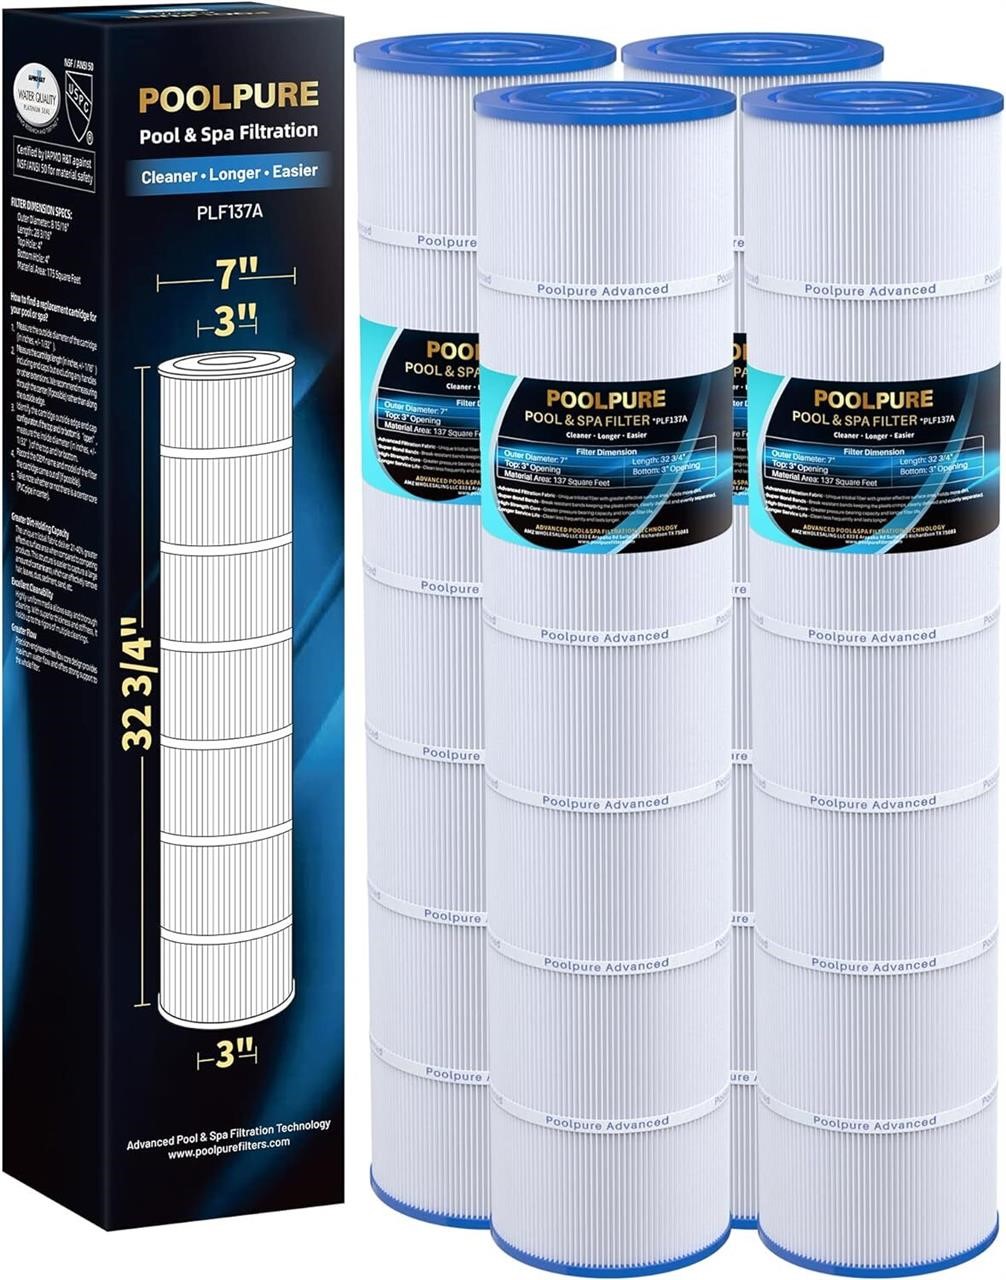 POOLPURE PLF137A Pool Filter Replaces PA137  Unice